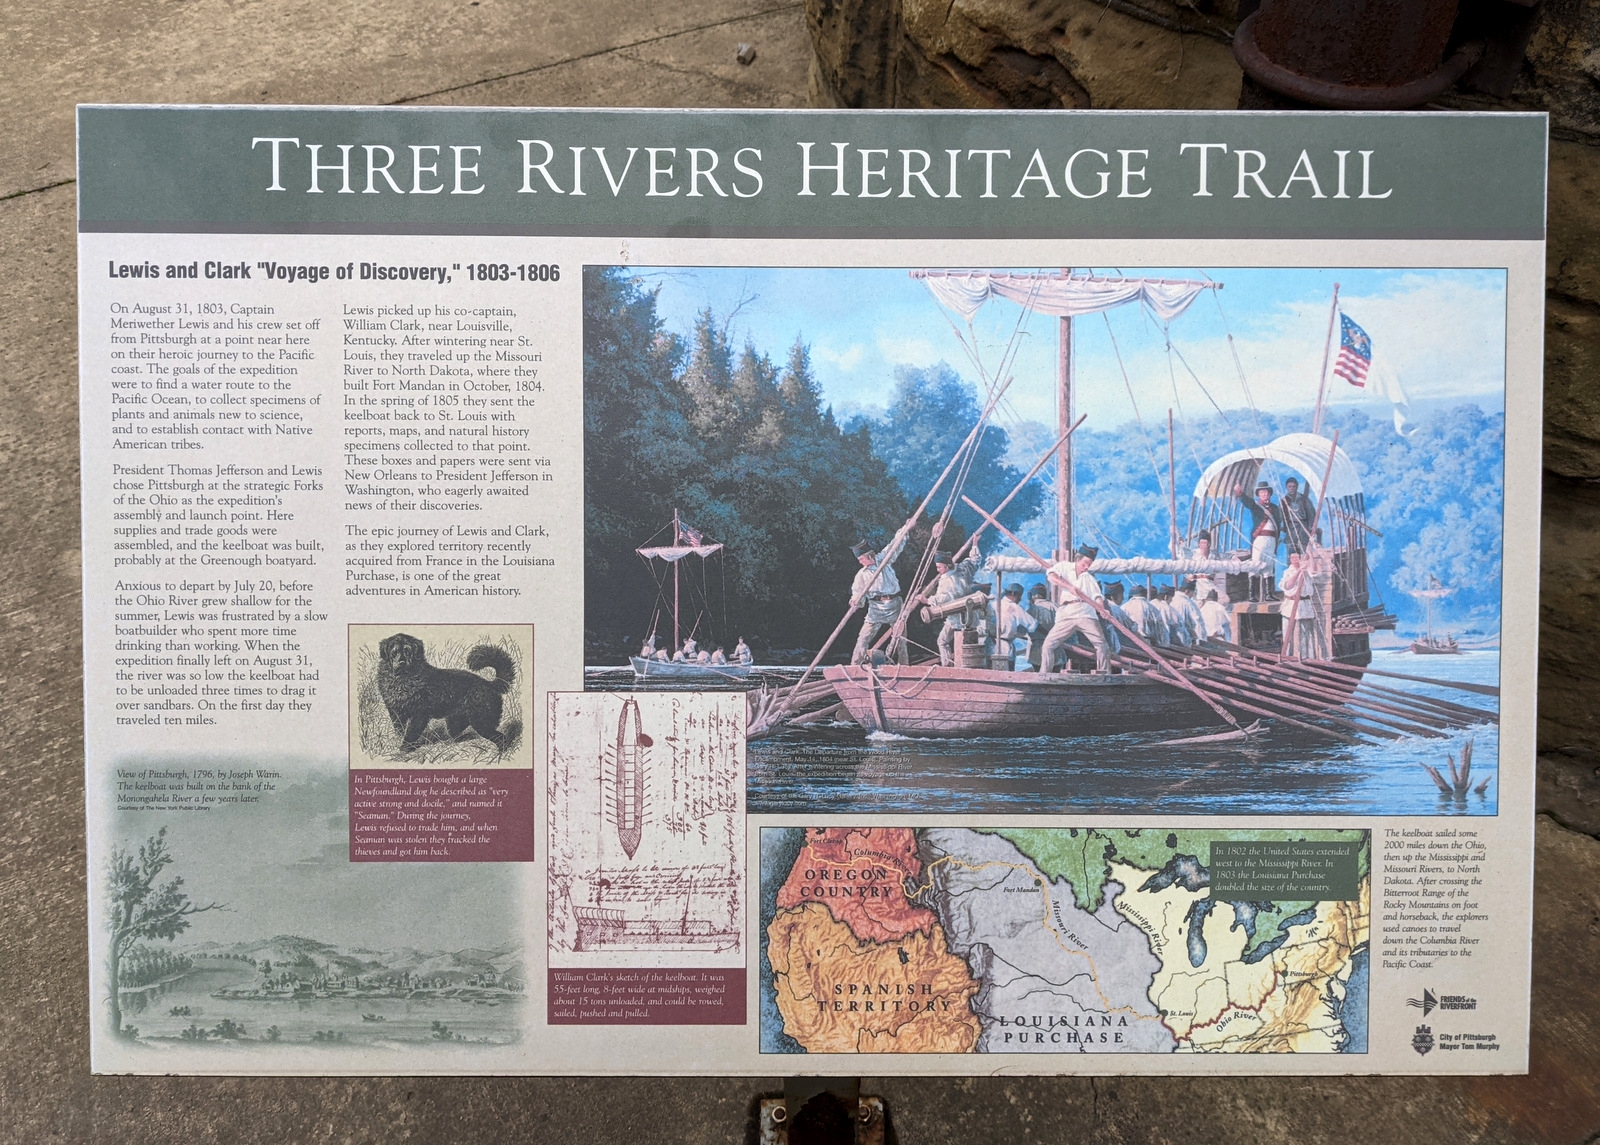 Lewis and Clark "Voyage of Discovery," 1803-1806 Marker